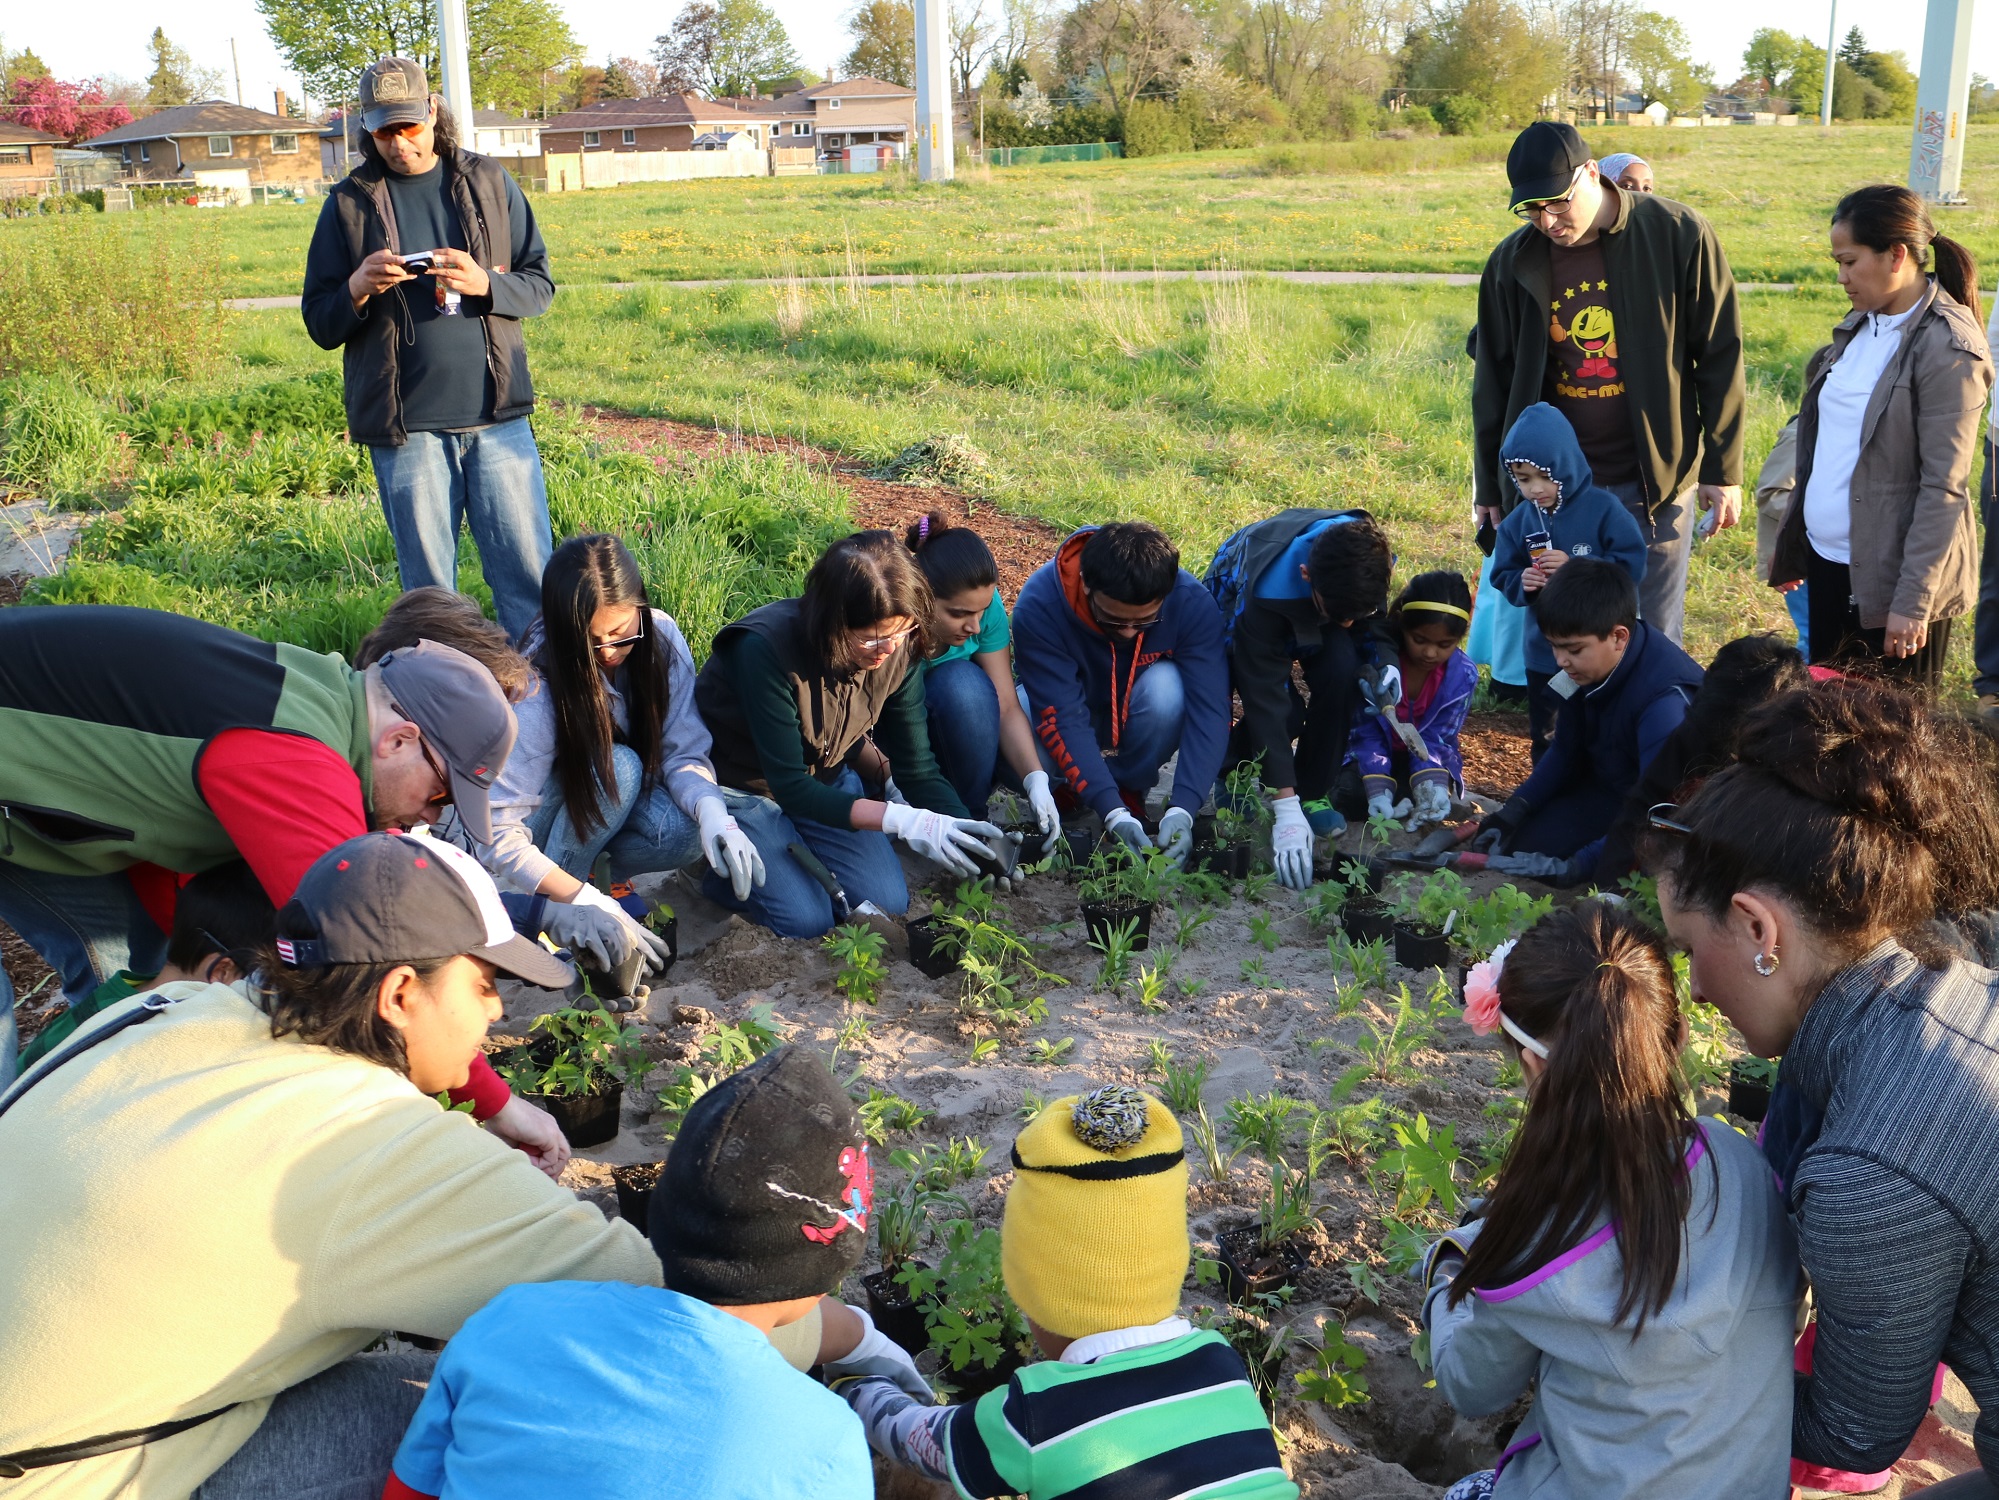 local residents take part in The Meadoway community engagement planting event